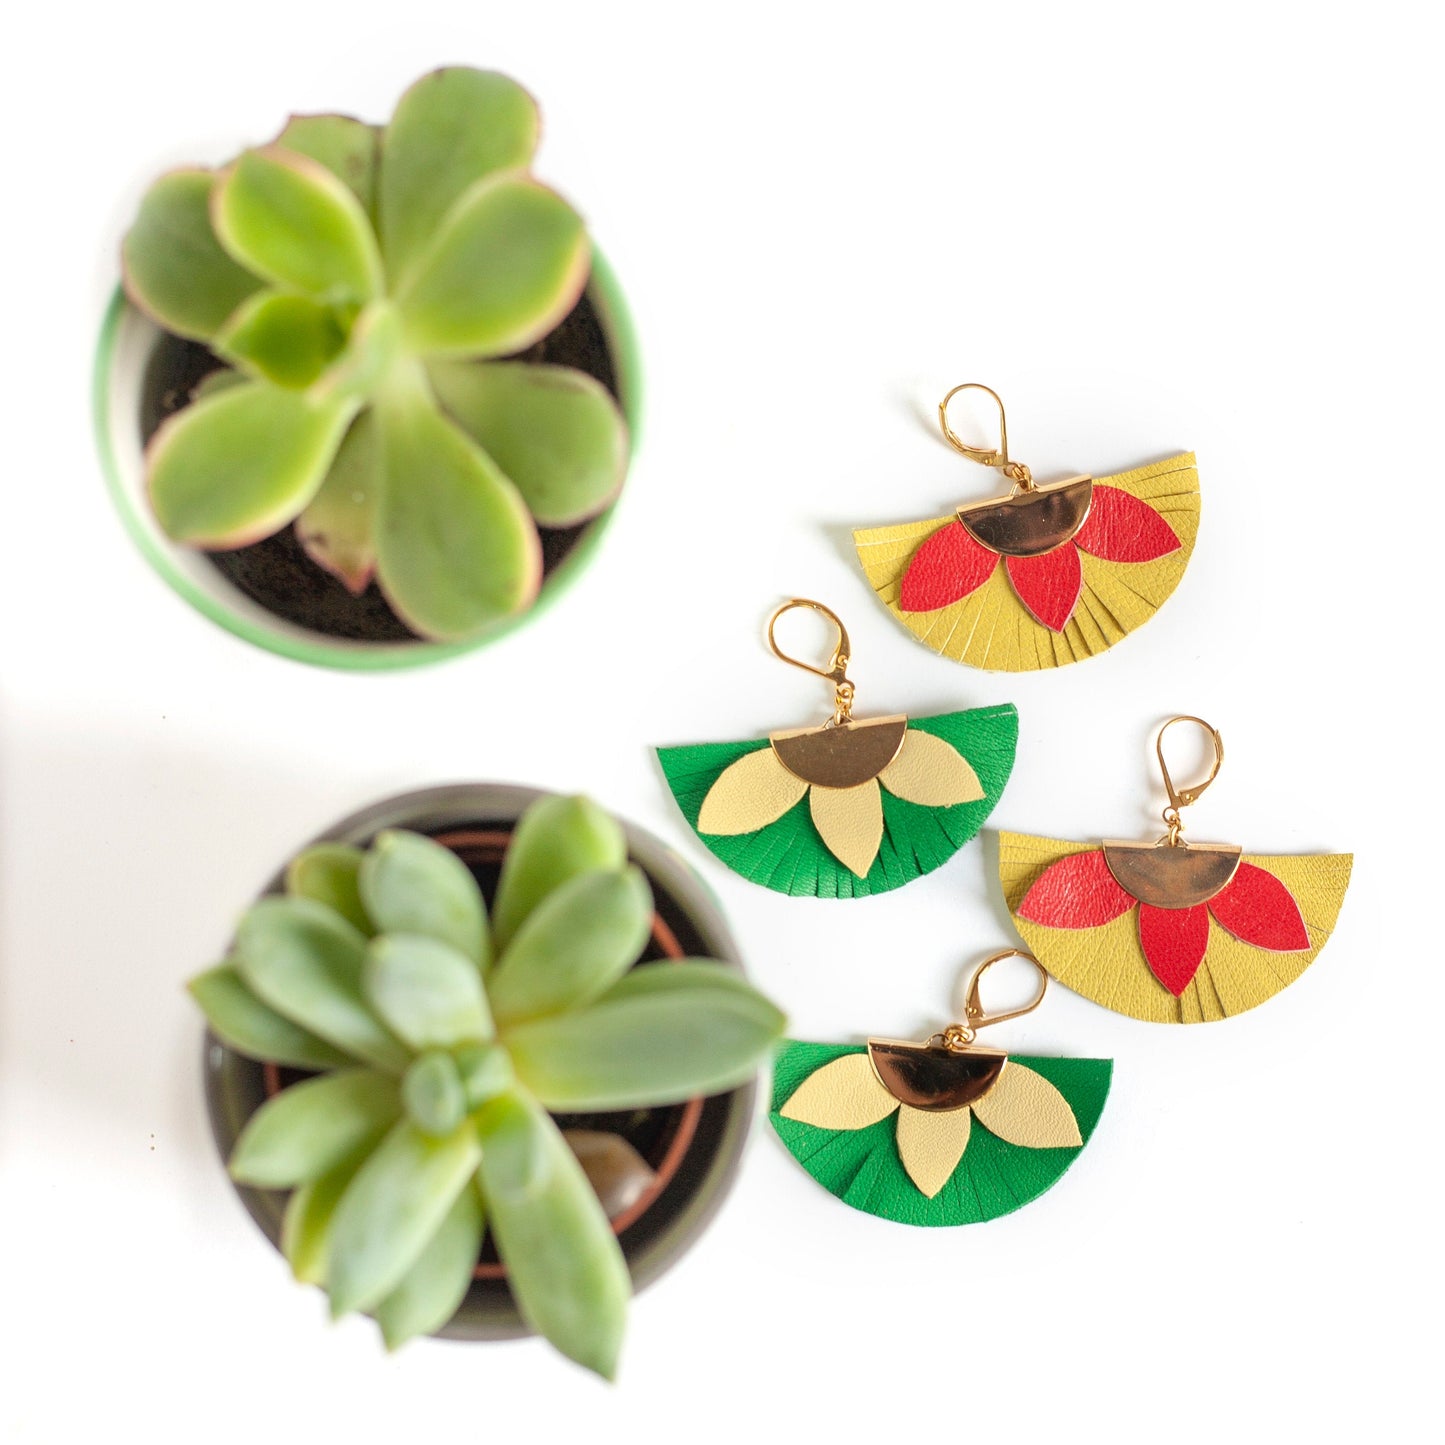 Yellow and red half-circle leather earrings